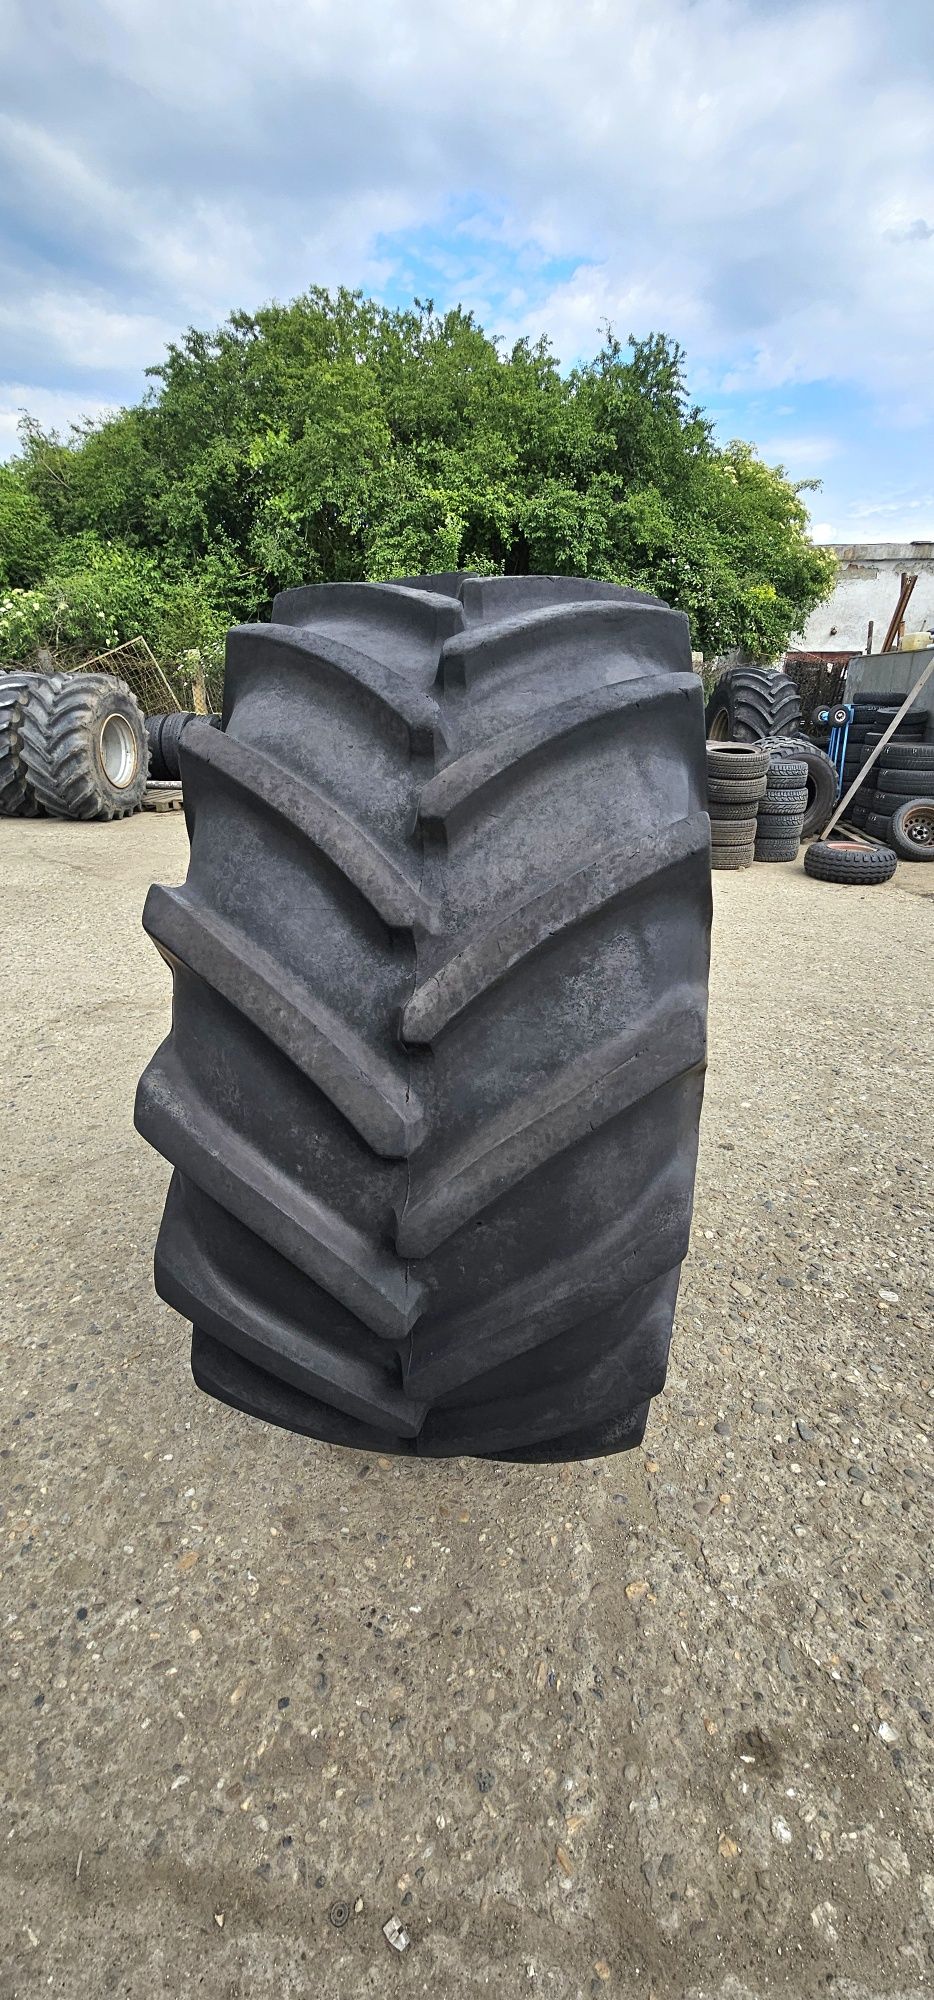 Anvelope 800 65 R 32 Michelin.